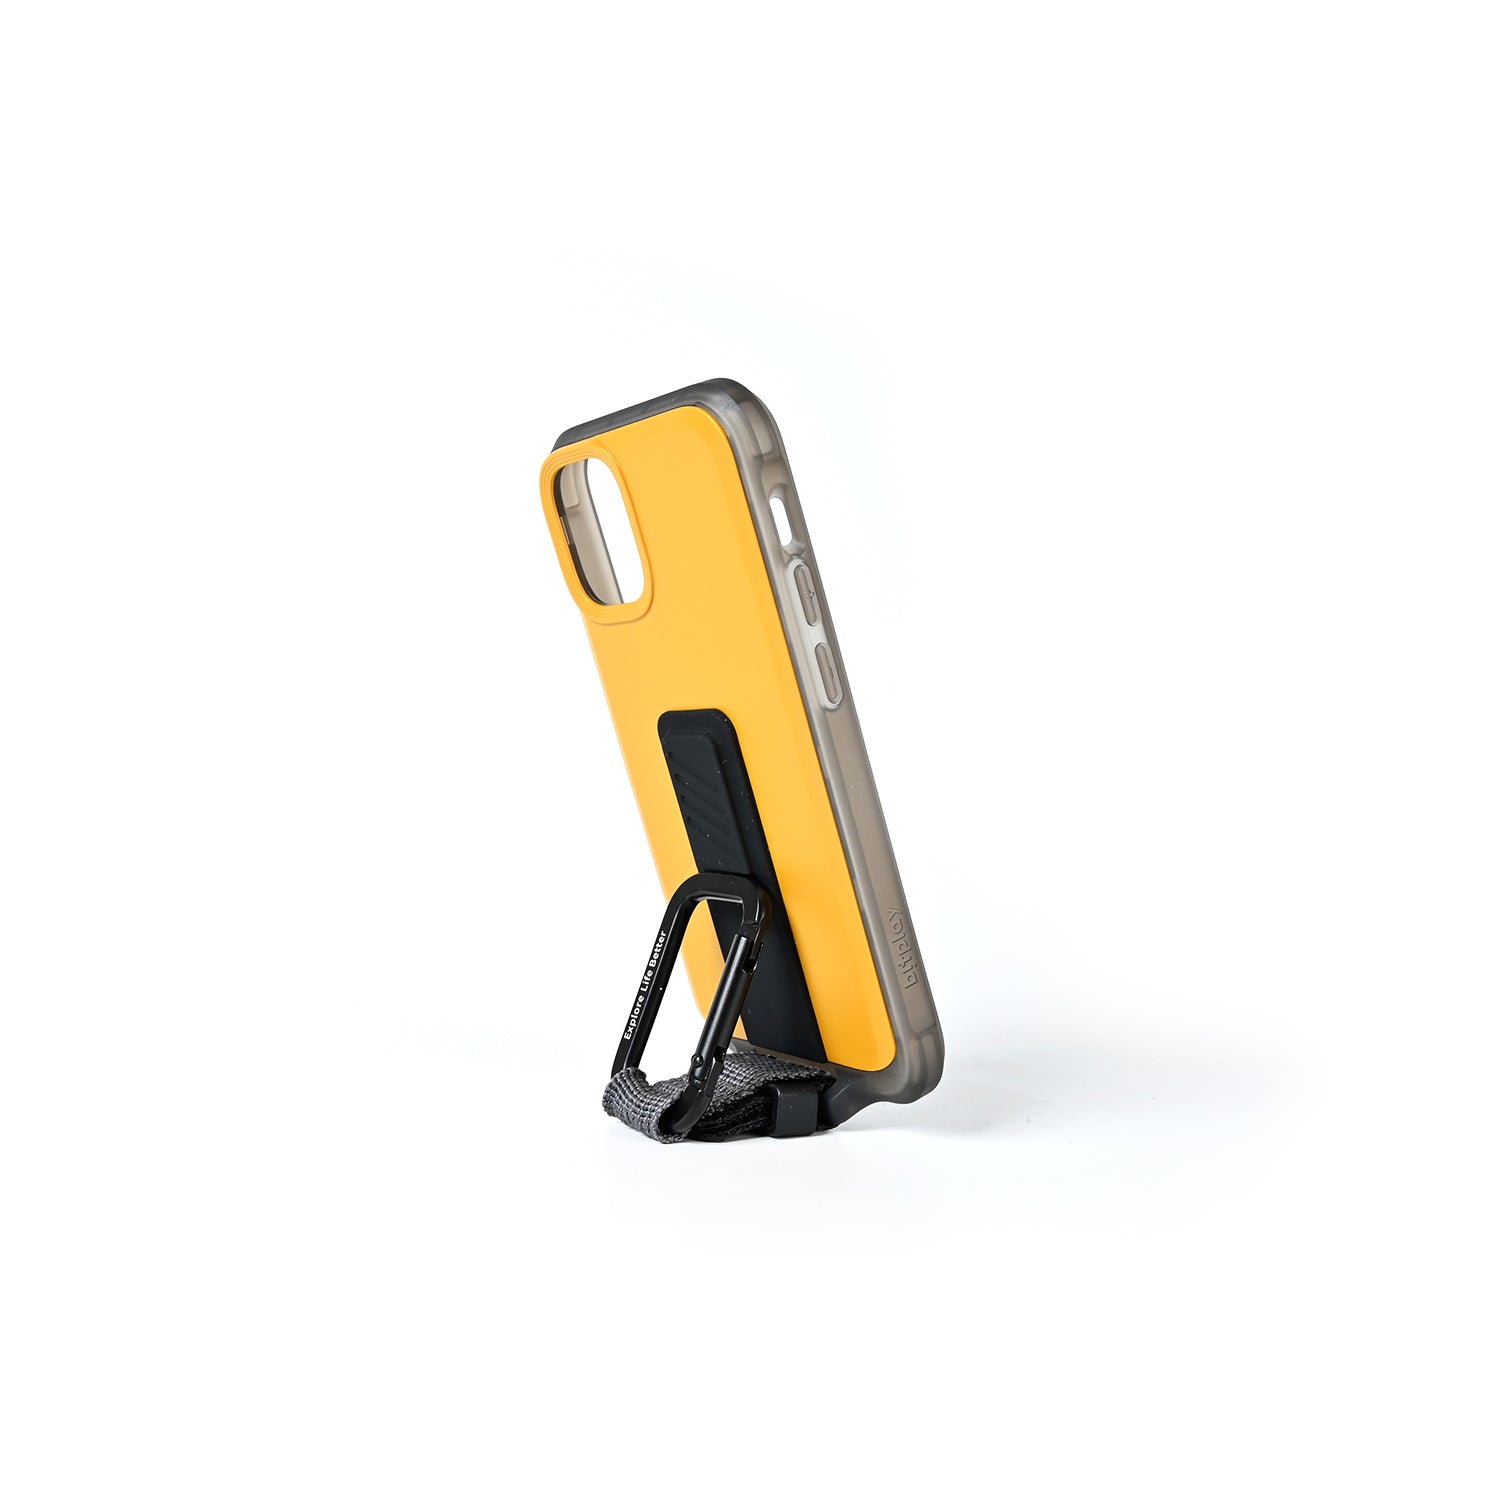 Wander Case for iPhone 12 Series - Yellow